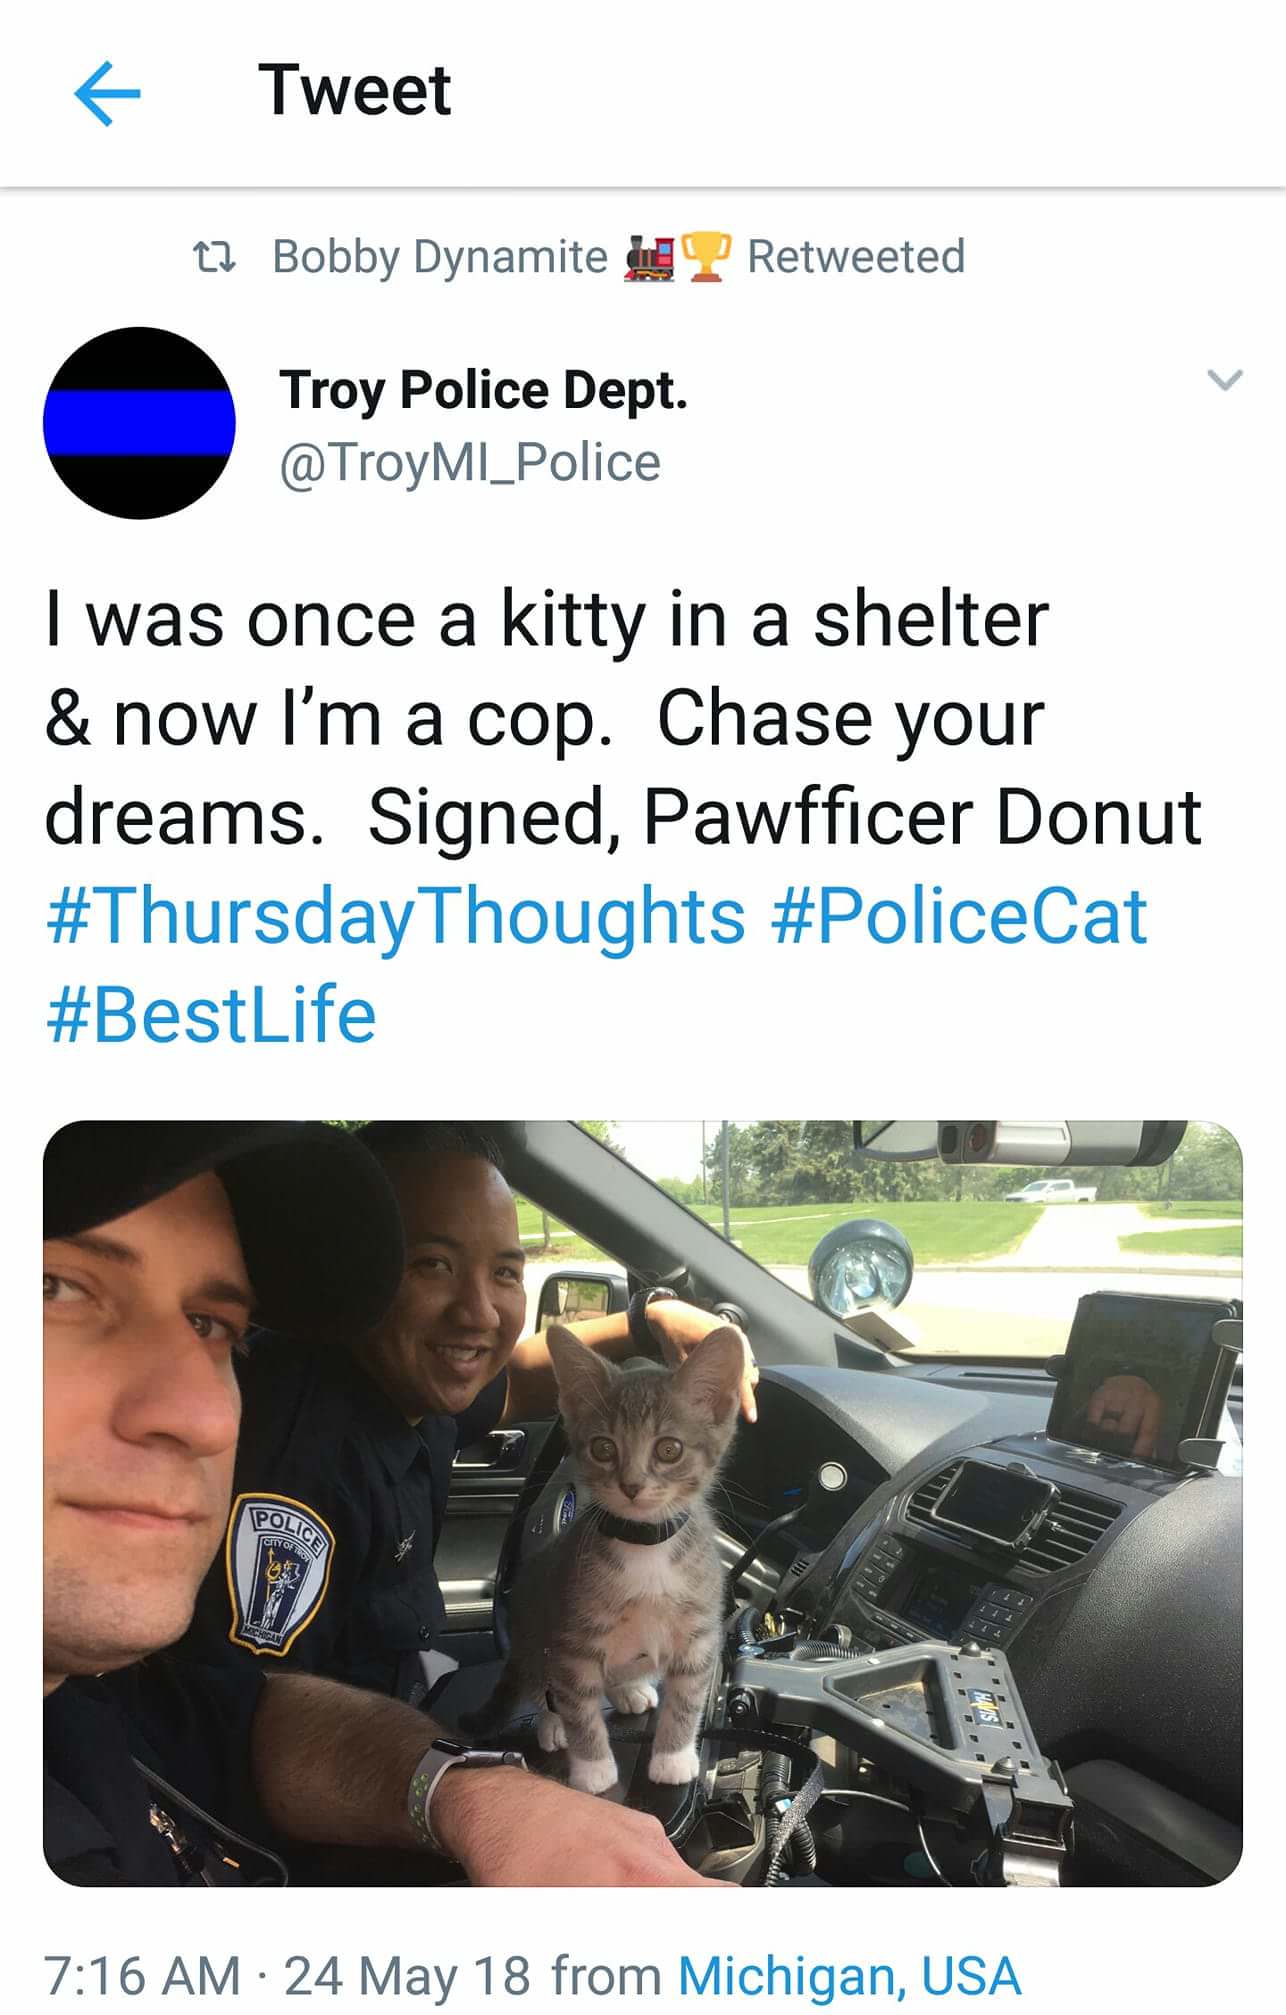 pawfficer donut - Tweet 12 Bobby Dynamite ? Retweeted Troy Police Dept. I was once a kitty in a shelter & now I'm a cop. Chase your dreams. Signed, Pawfficer Donut Thoughts Polic diyor 24 May 18 from Michigan, Usa